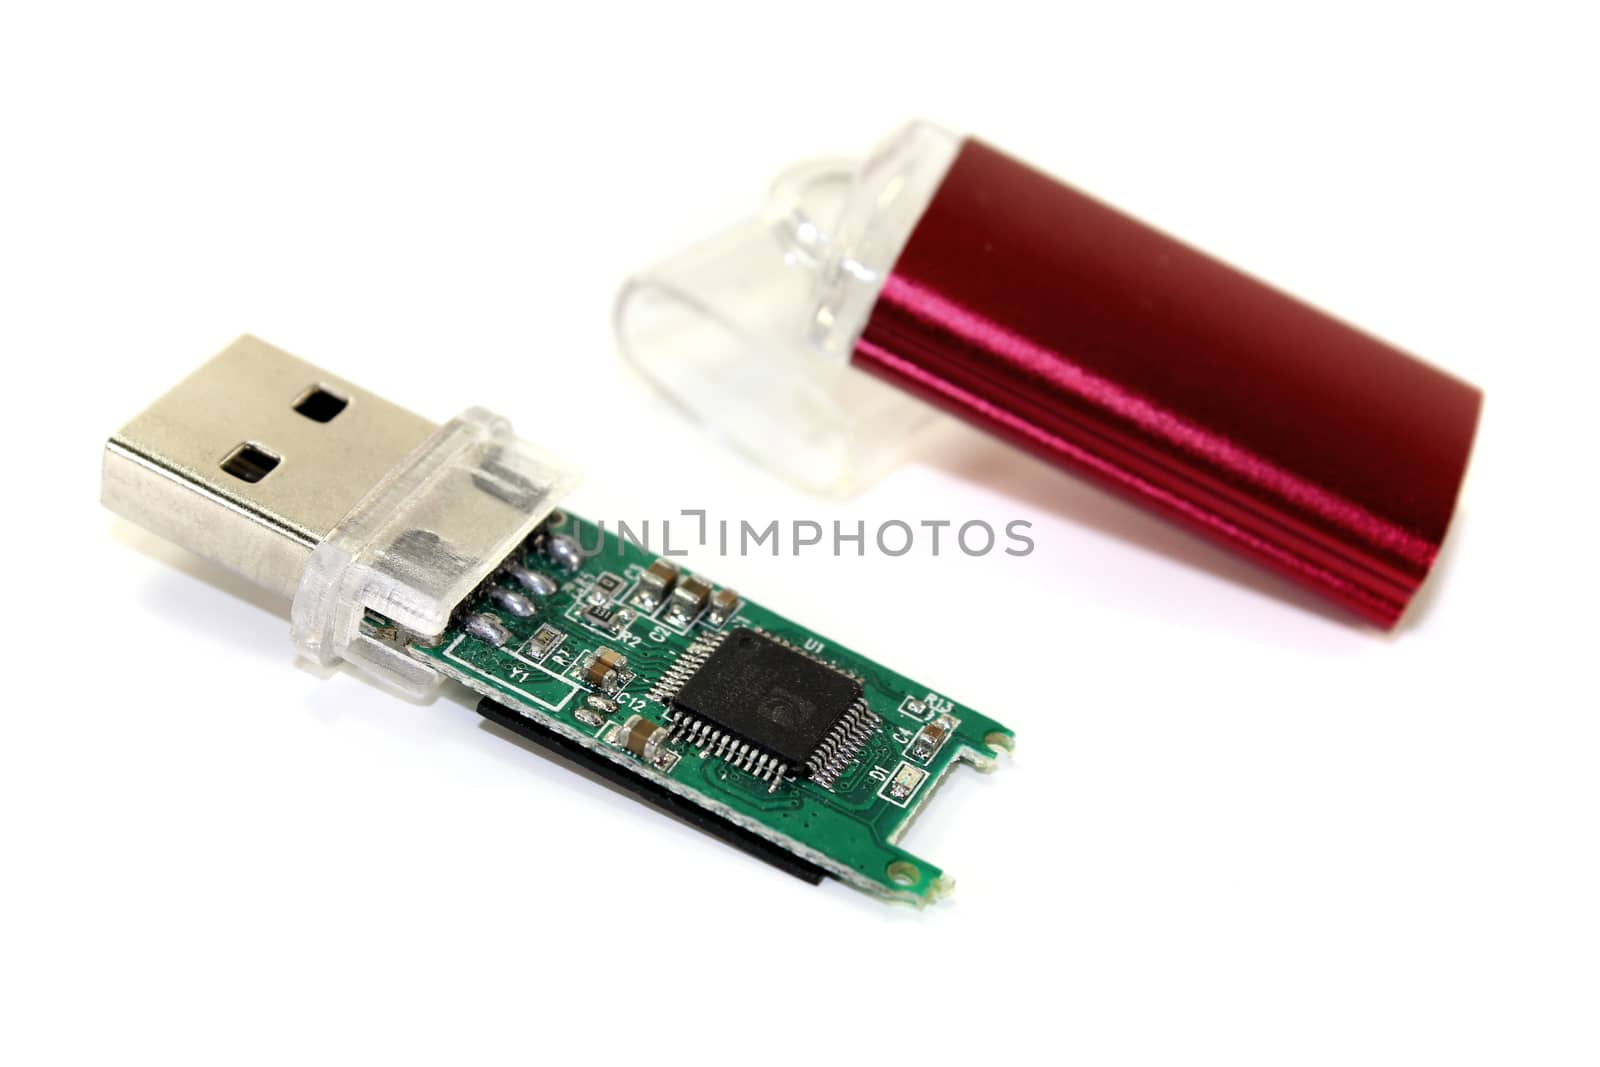 disassembled red USB flash drive on a light background